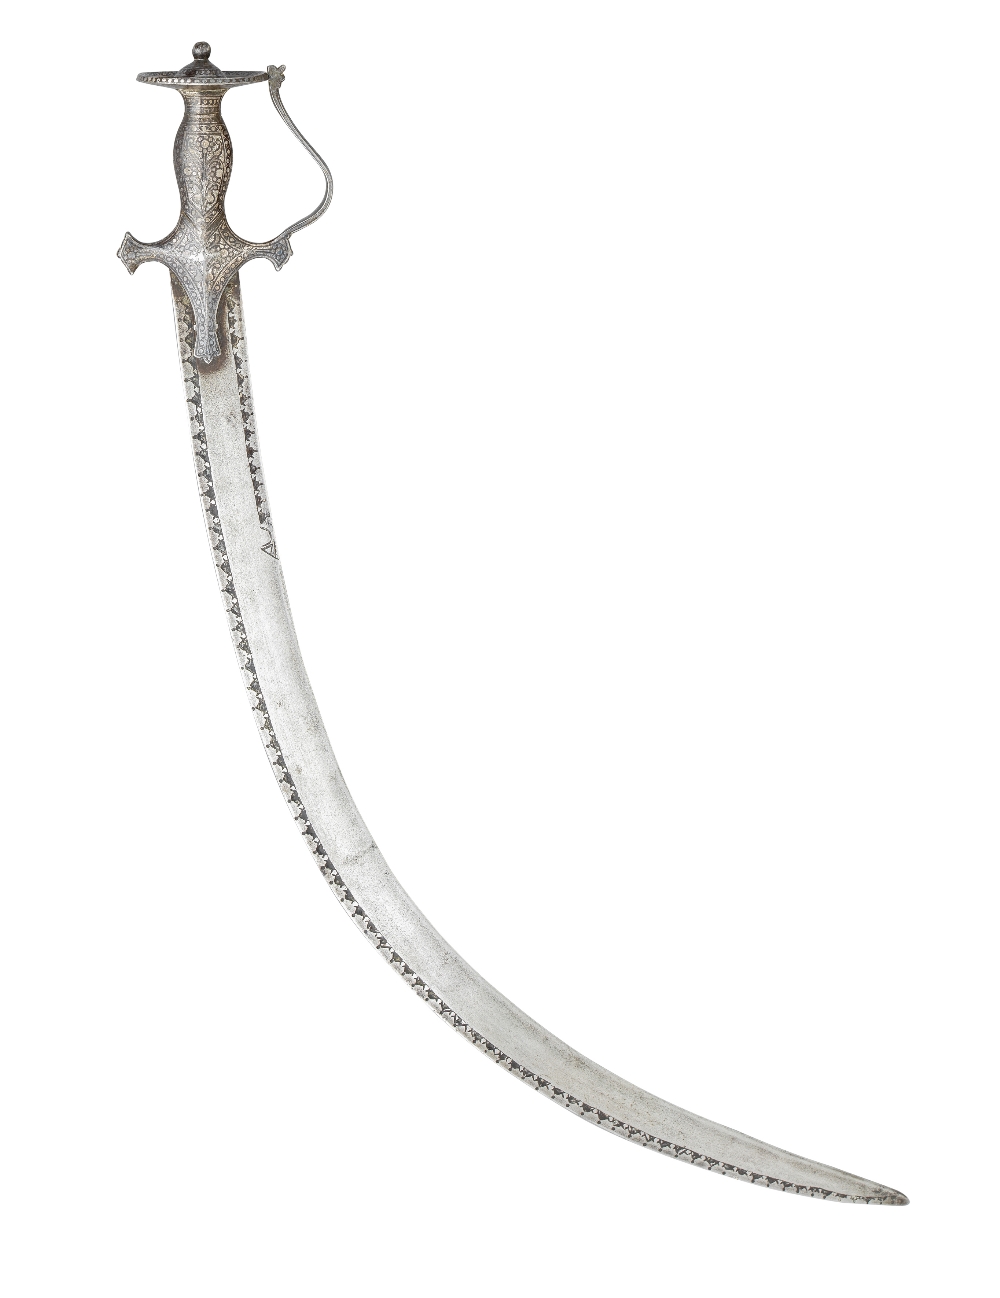 ‡ AN INDIAN SWORD (TALWAR), 19TH CENTURY with acutely curved blade formed with a reinforced